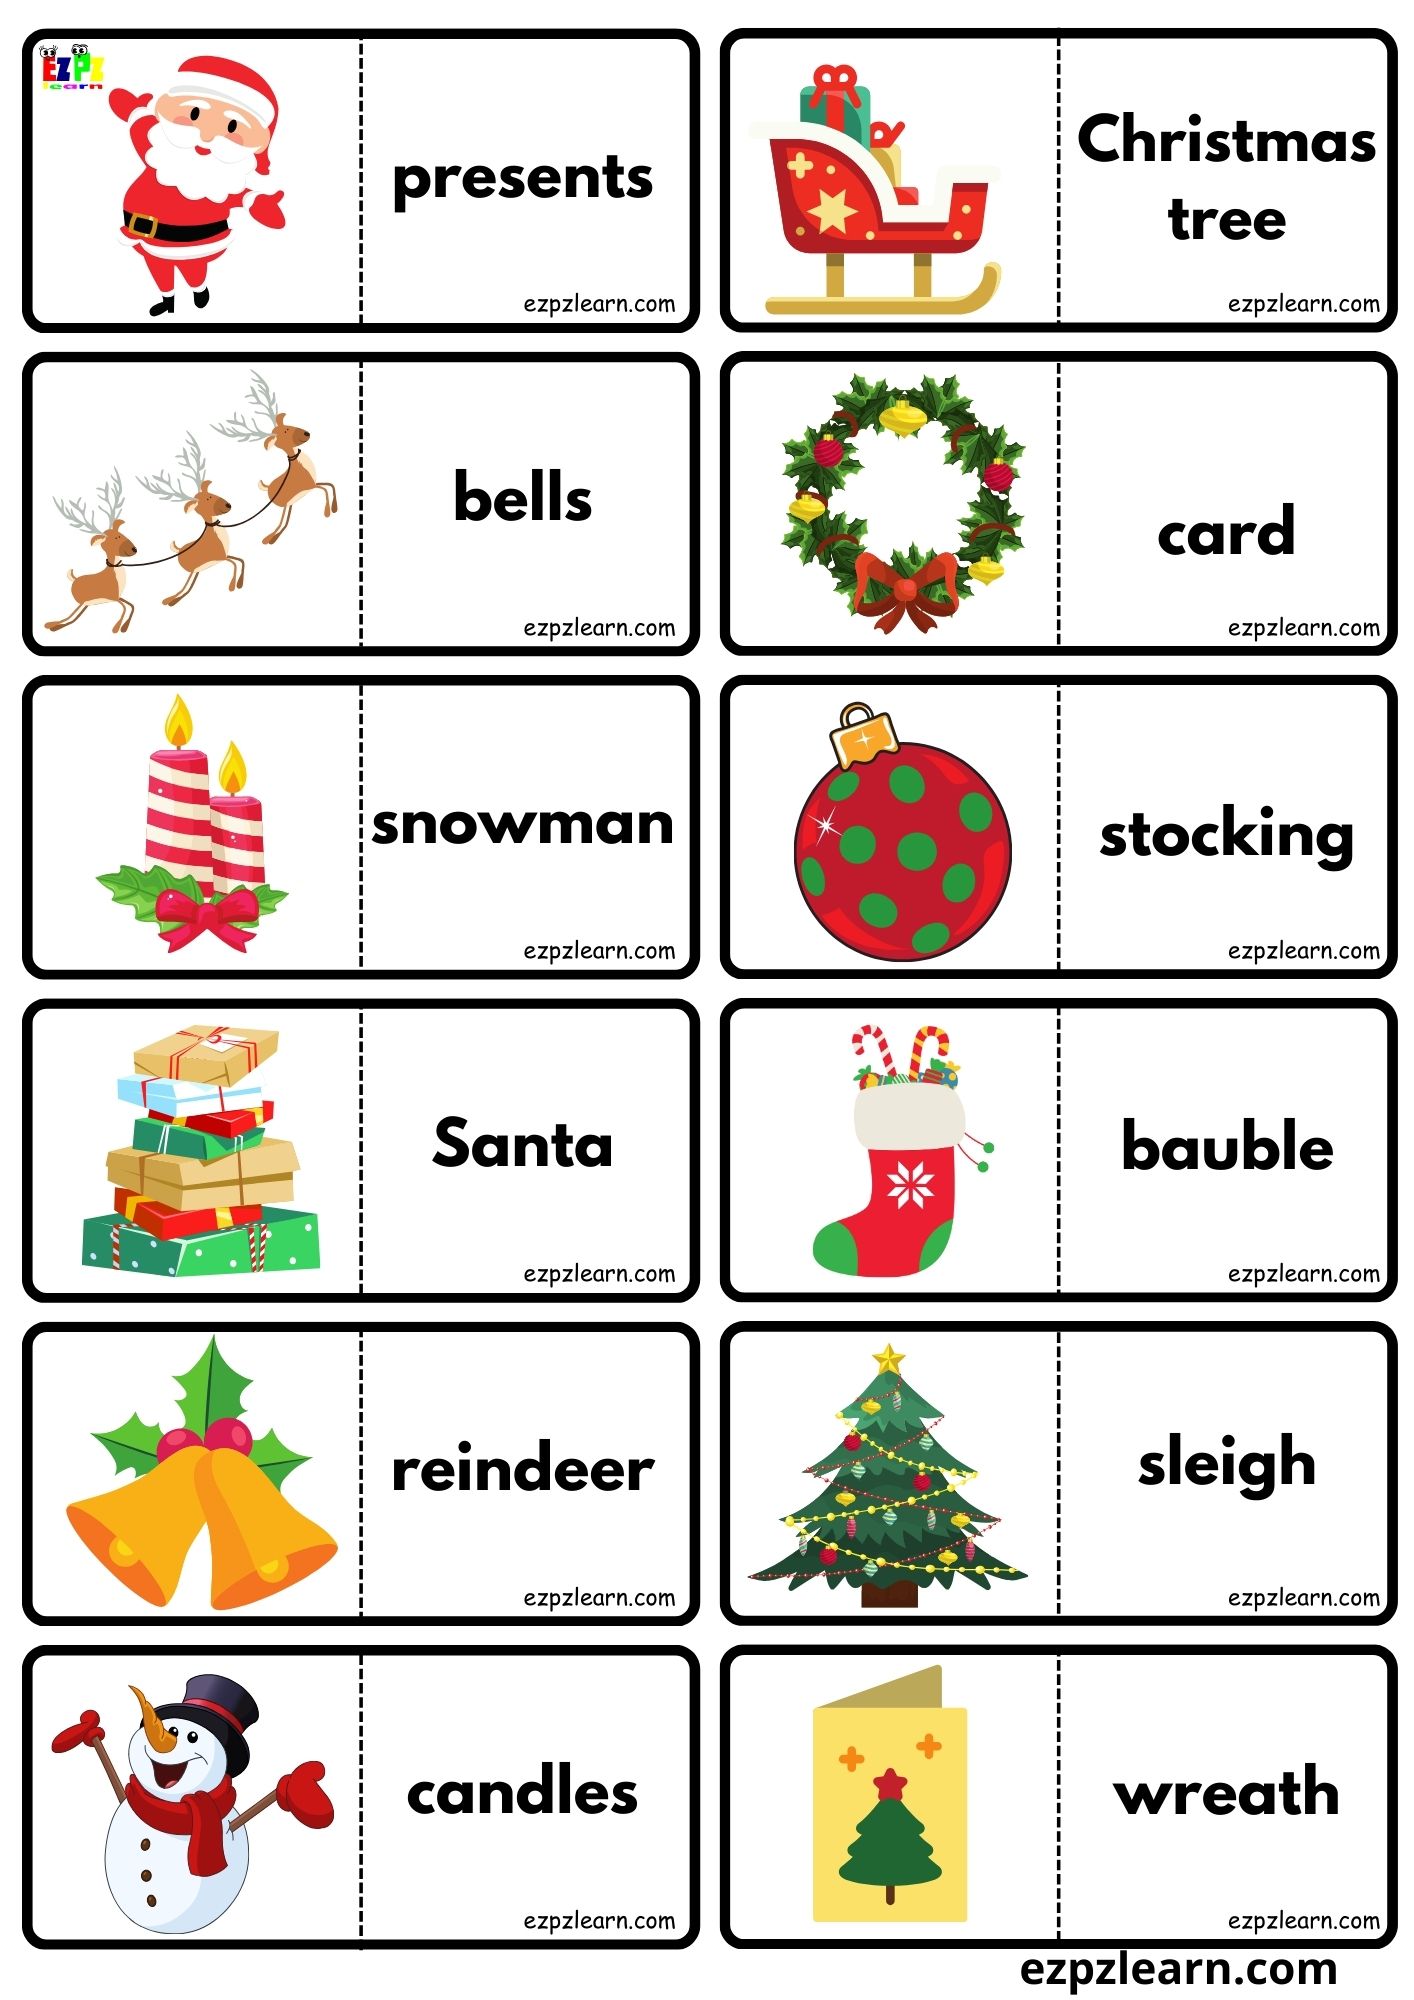 Winter Clothes Vocabulary Dominoes Matching Game for Kids and English  Language Learners Free PDF Download 